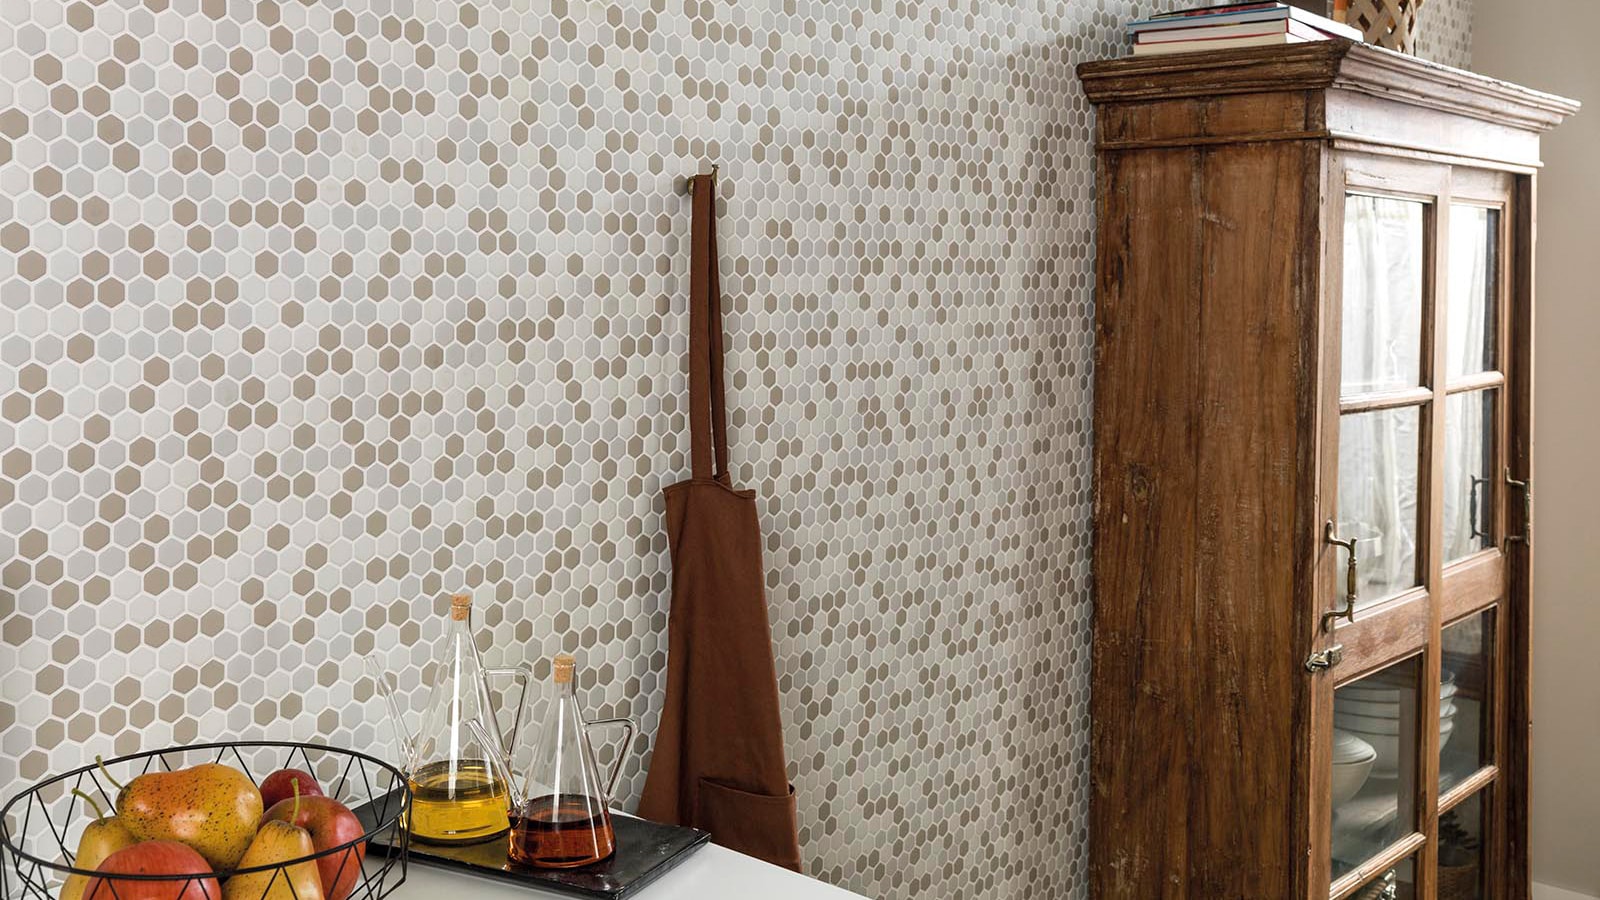 Hexagonal tiles: originality and dynamism in bathrooms and kitchens